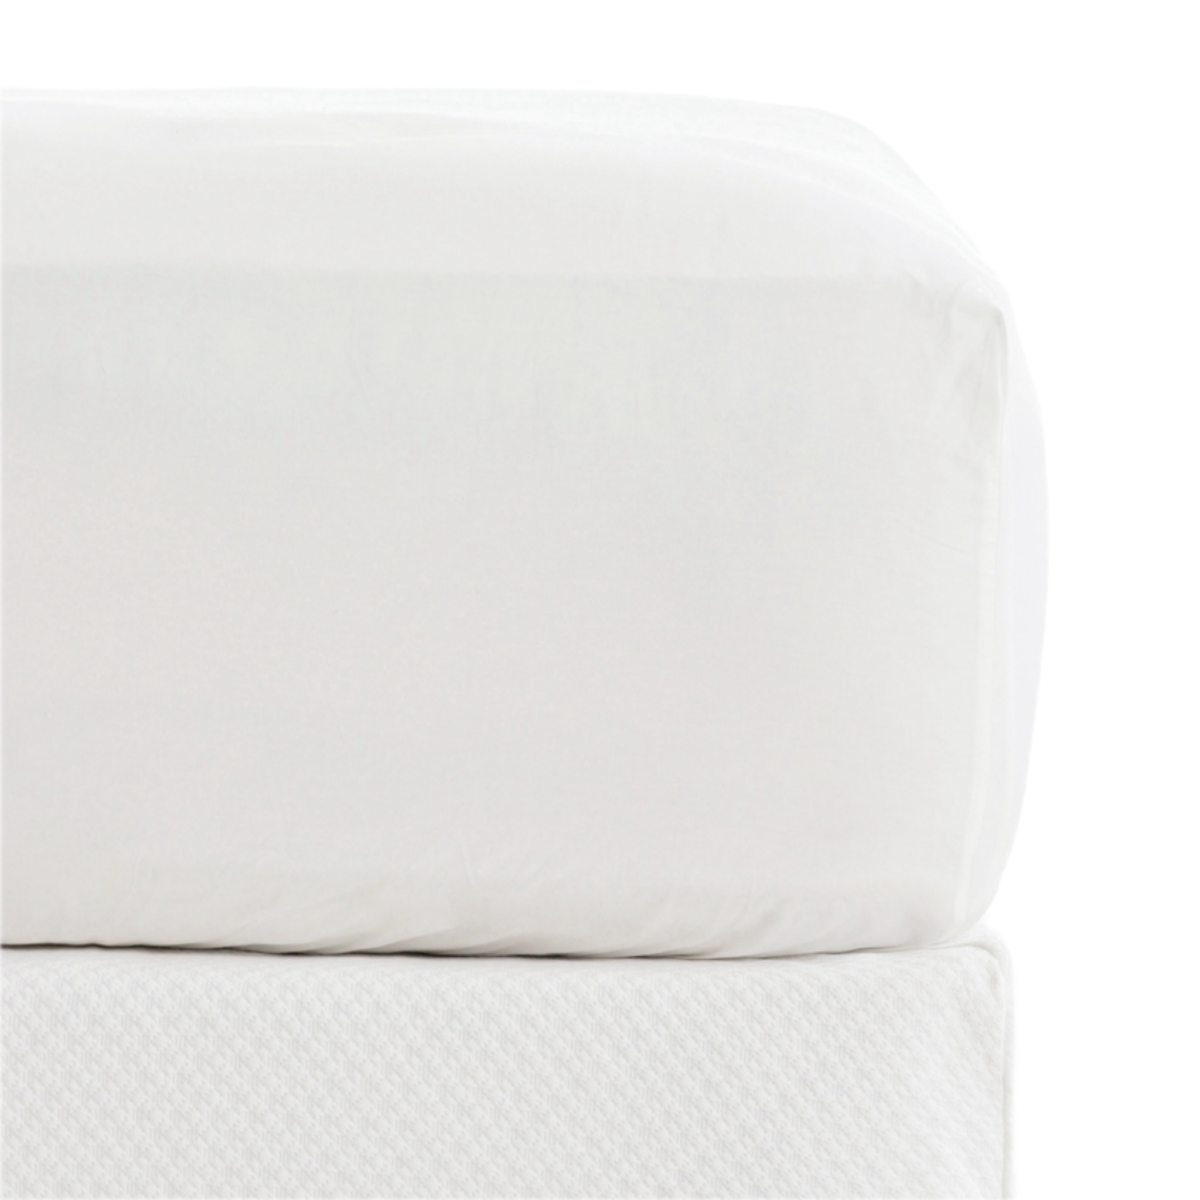 Fitted Sheet of White Pine Cone Hill Classic Hemstitch Bedding